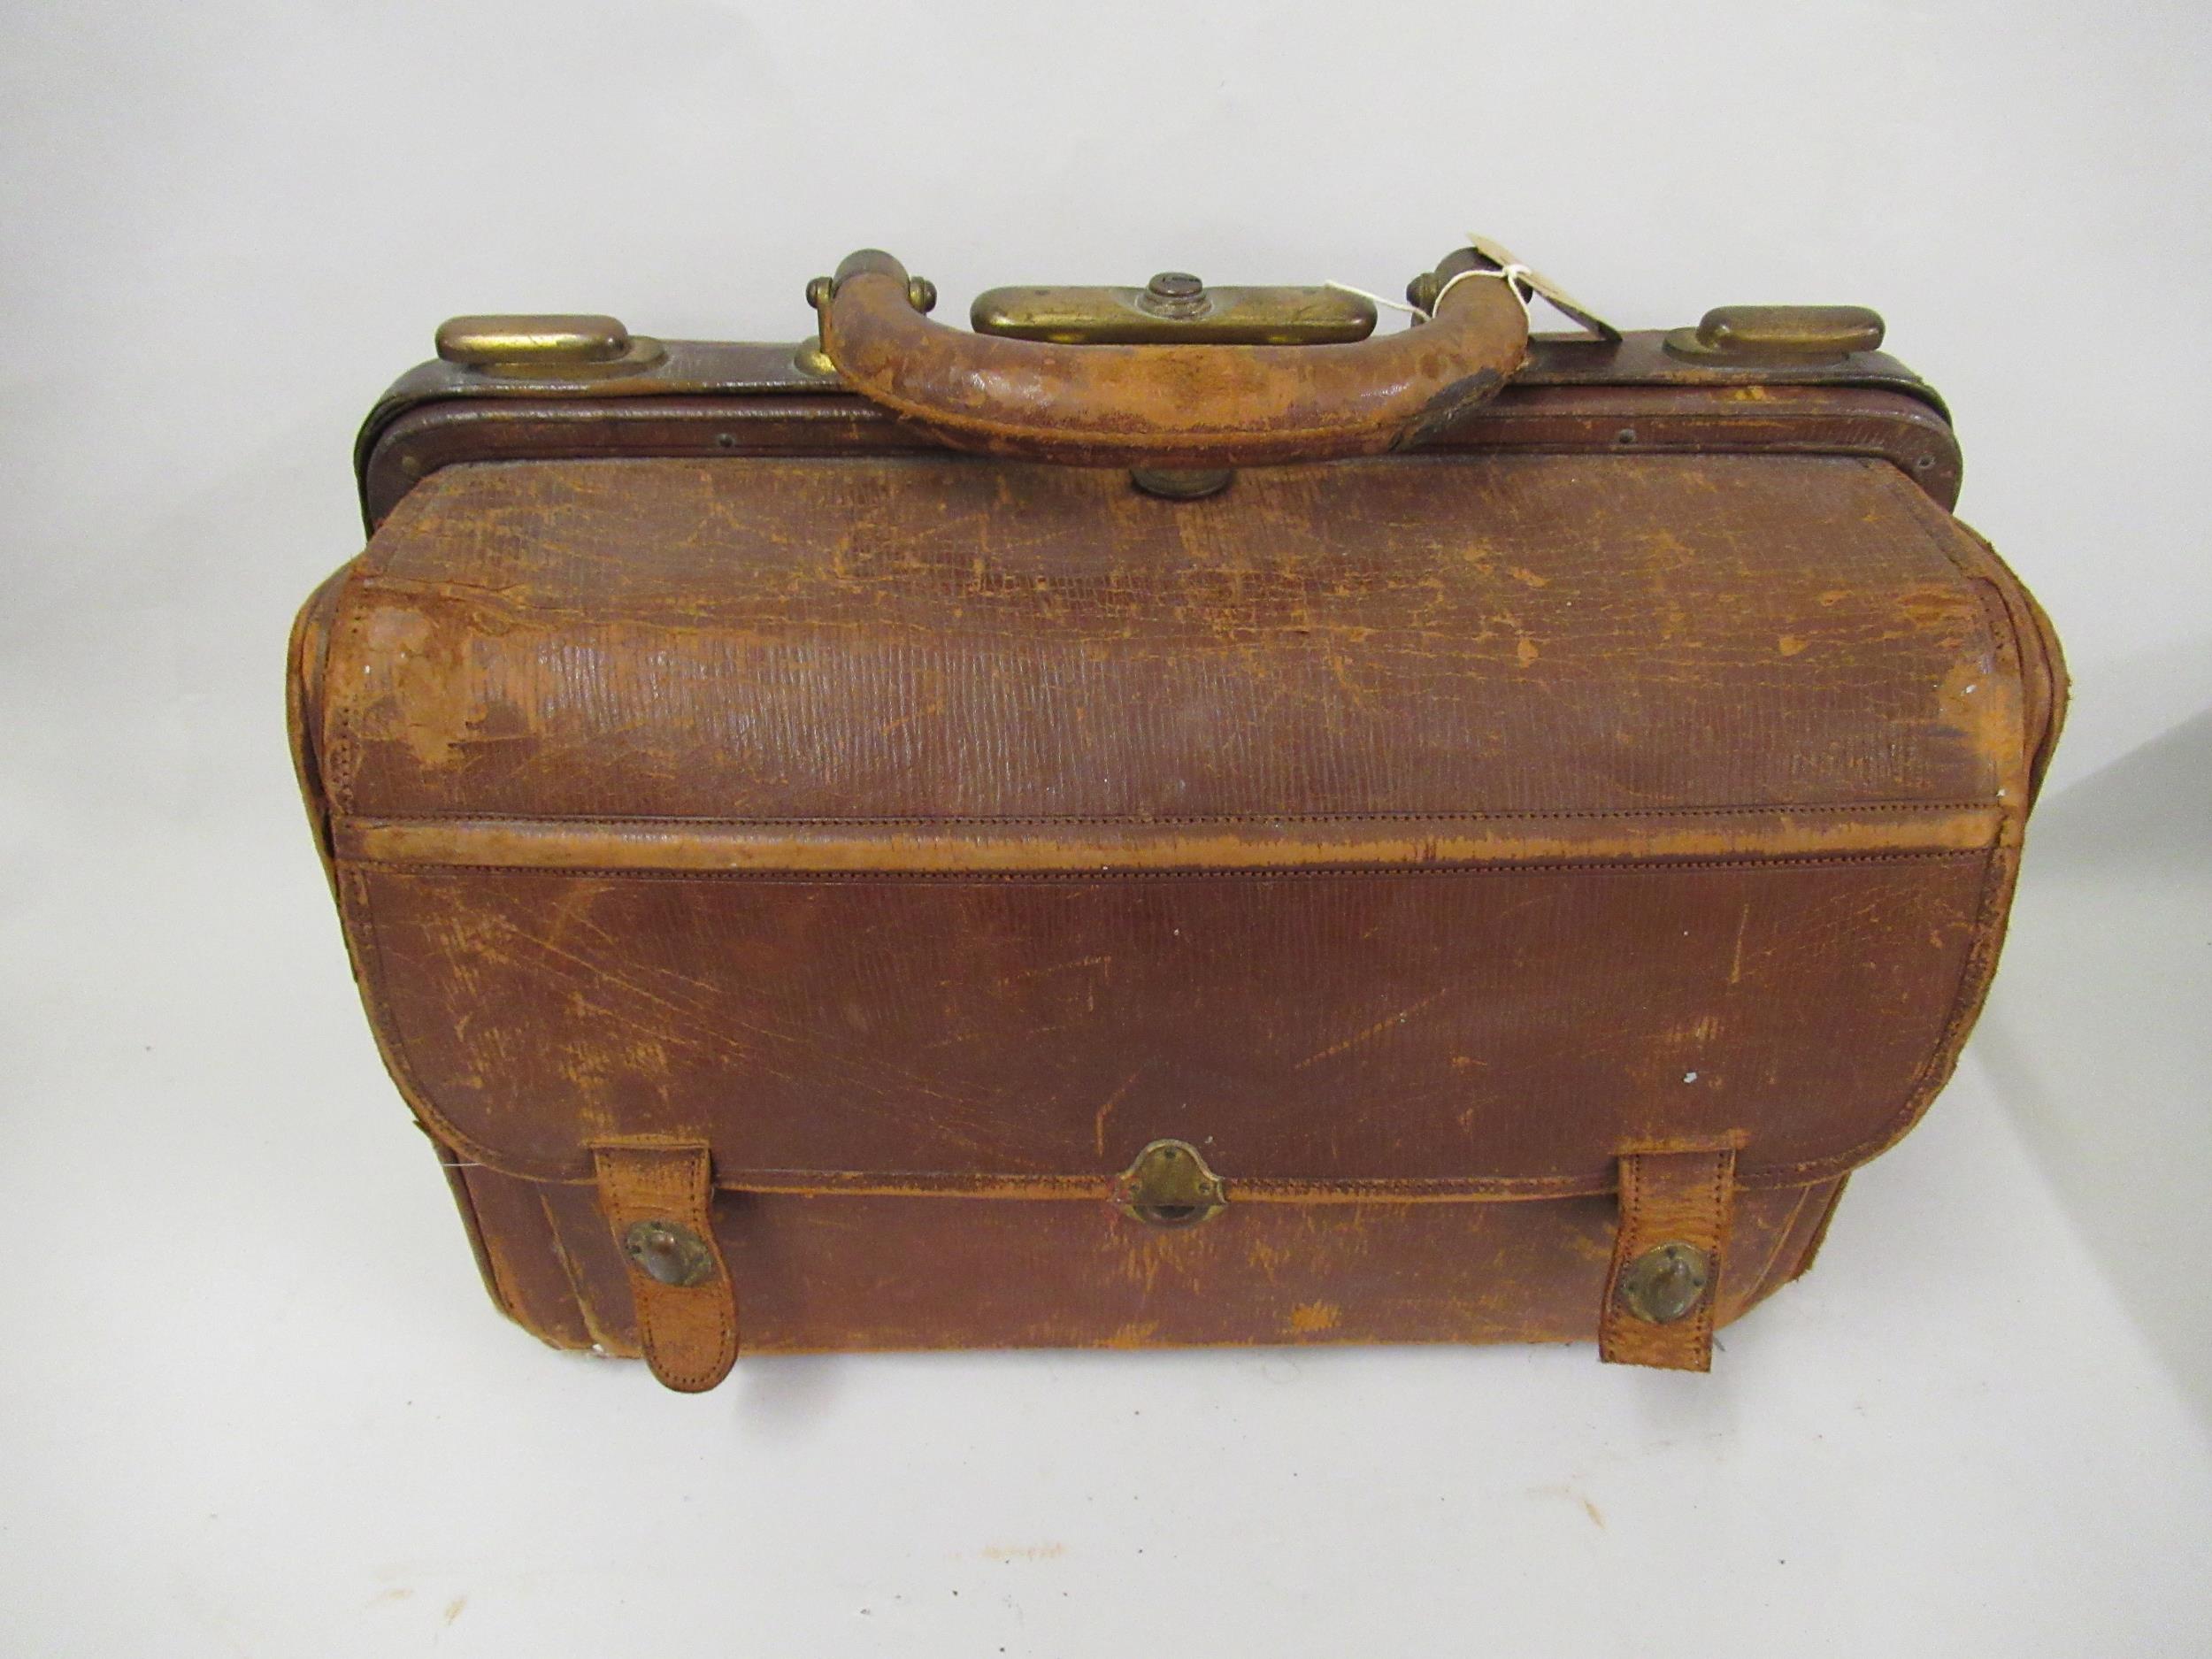 Gladstone type leather doctor's bag with brass fittings Wear to leather, missing key